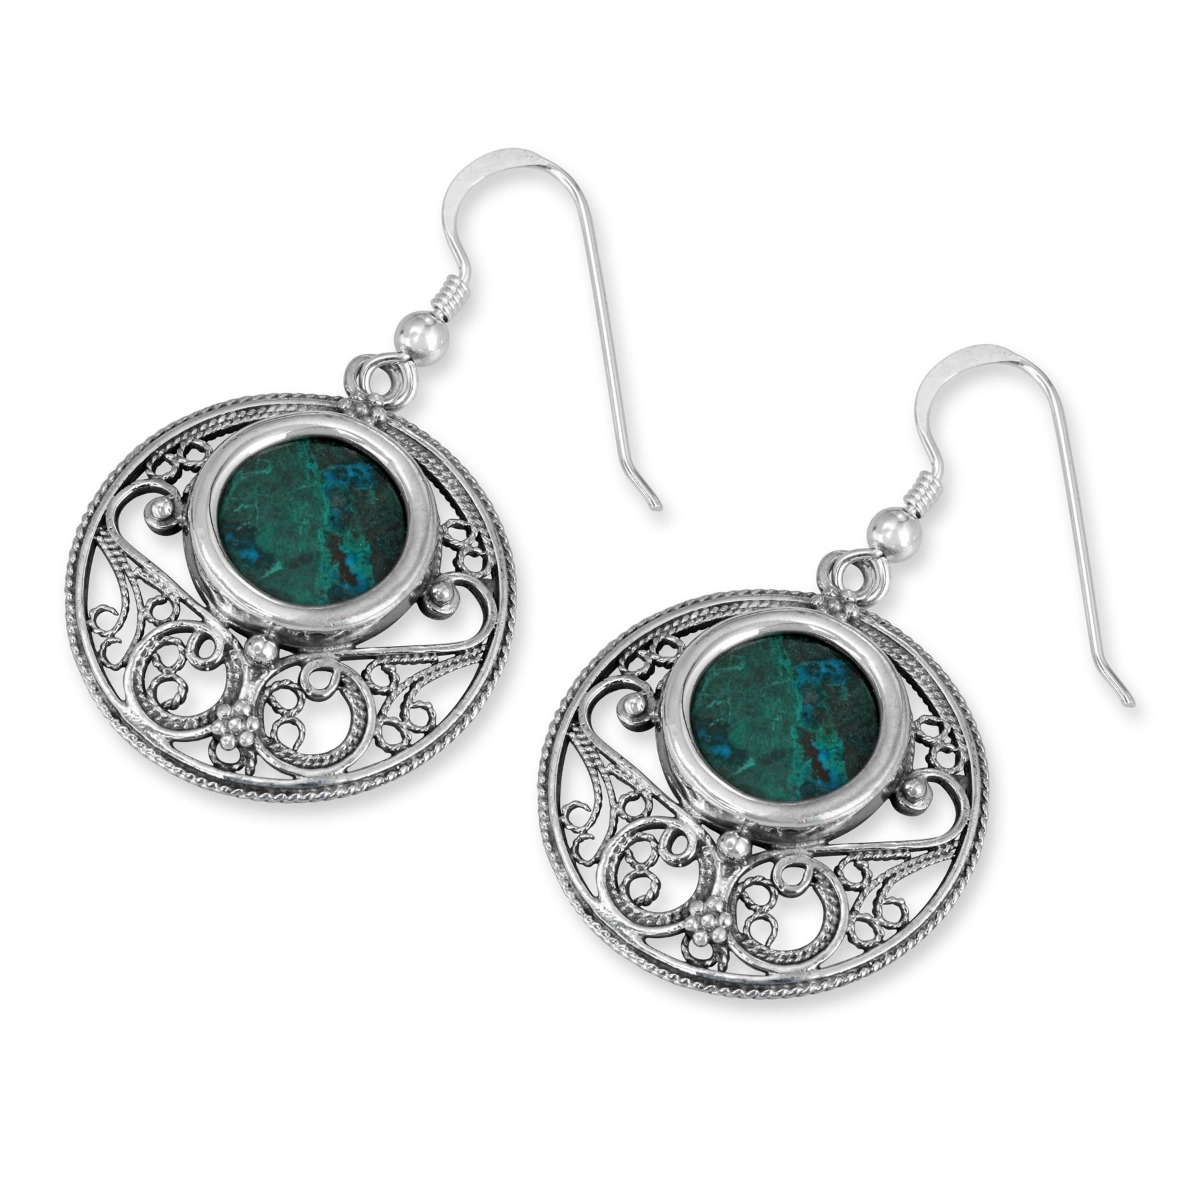 Rafael Jewelry Silver Ball Earrings Inset with Eilat Stone - 2